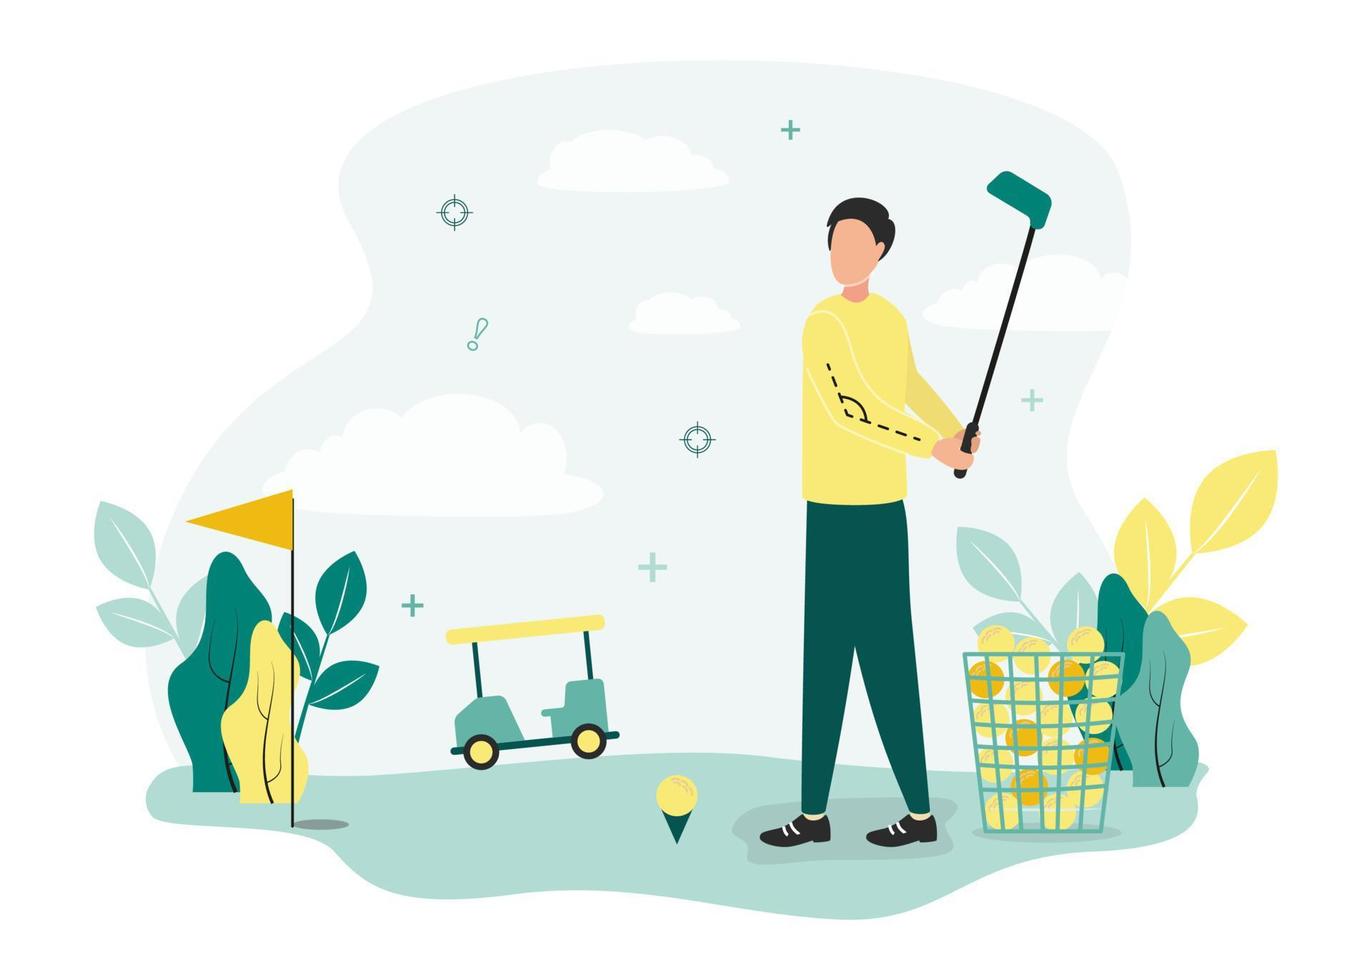 Golf illustration. A man with a stick stands near the ball on a stand and a basket with balls, on a golf course a flagpole with a flag, trees, a golf cart, against a background of trees vector